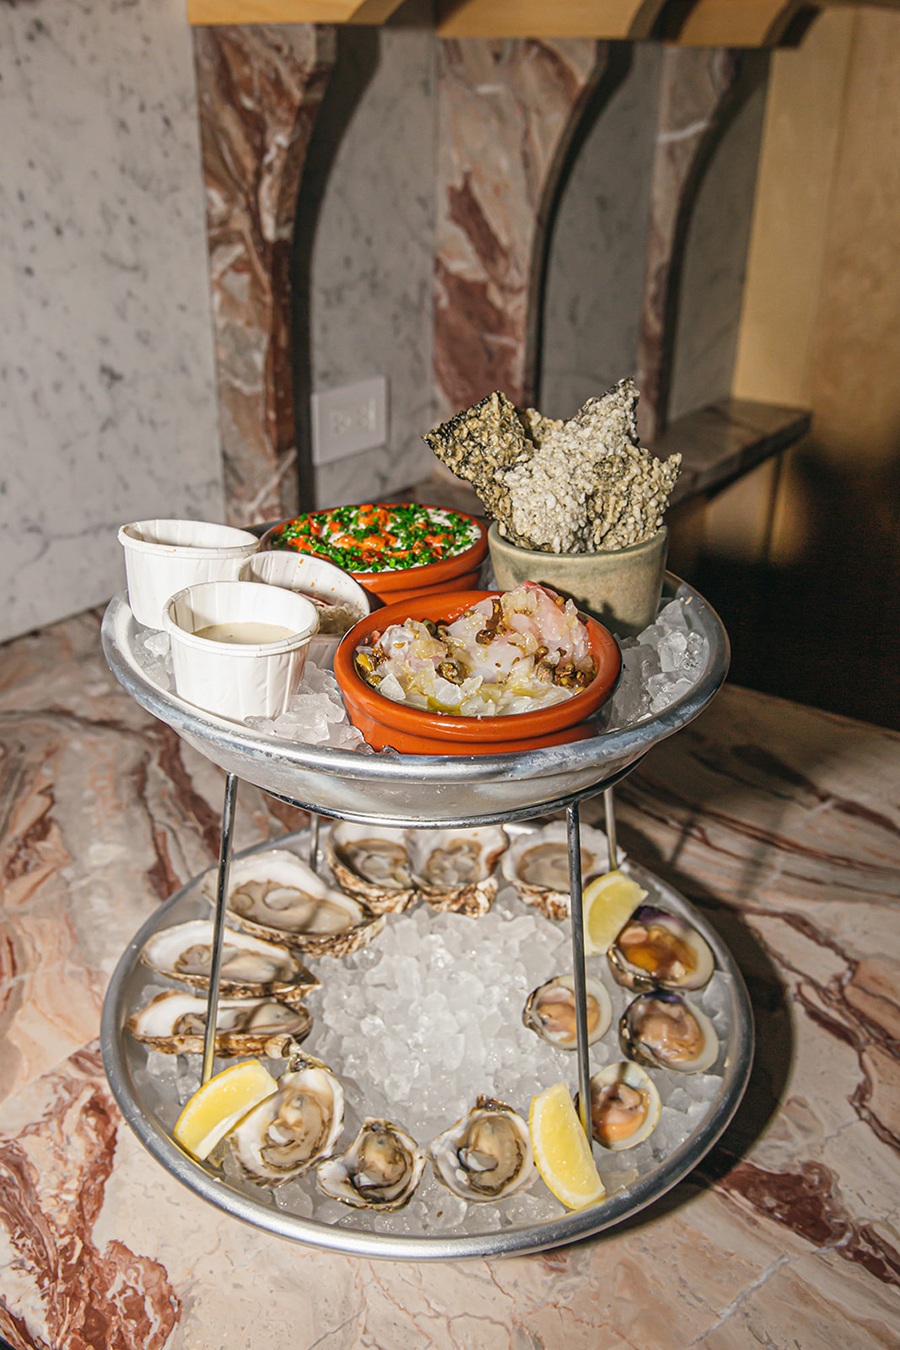 A two-tier seafood tower includes oysters, clams, crudo, and more.